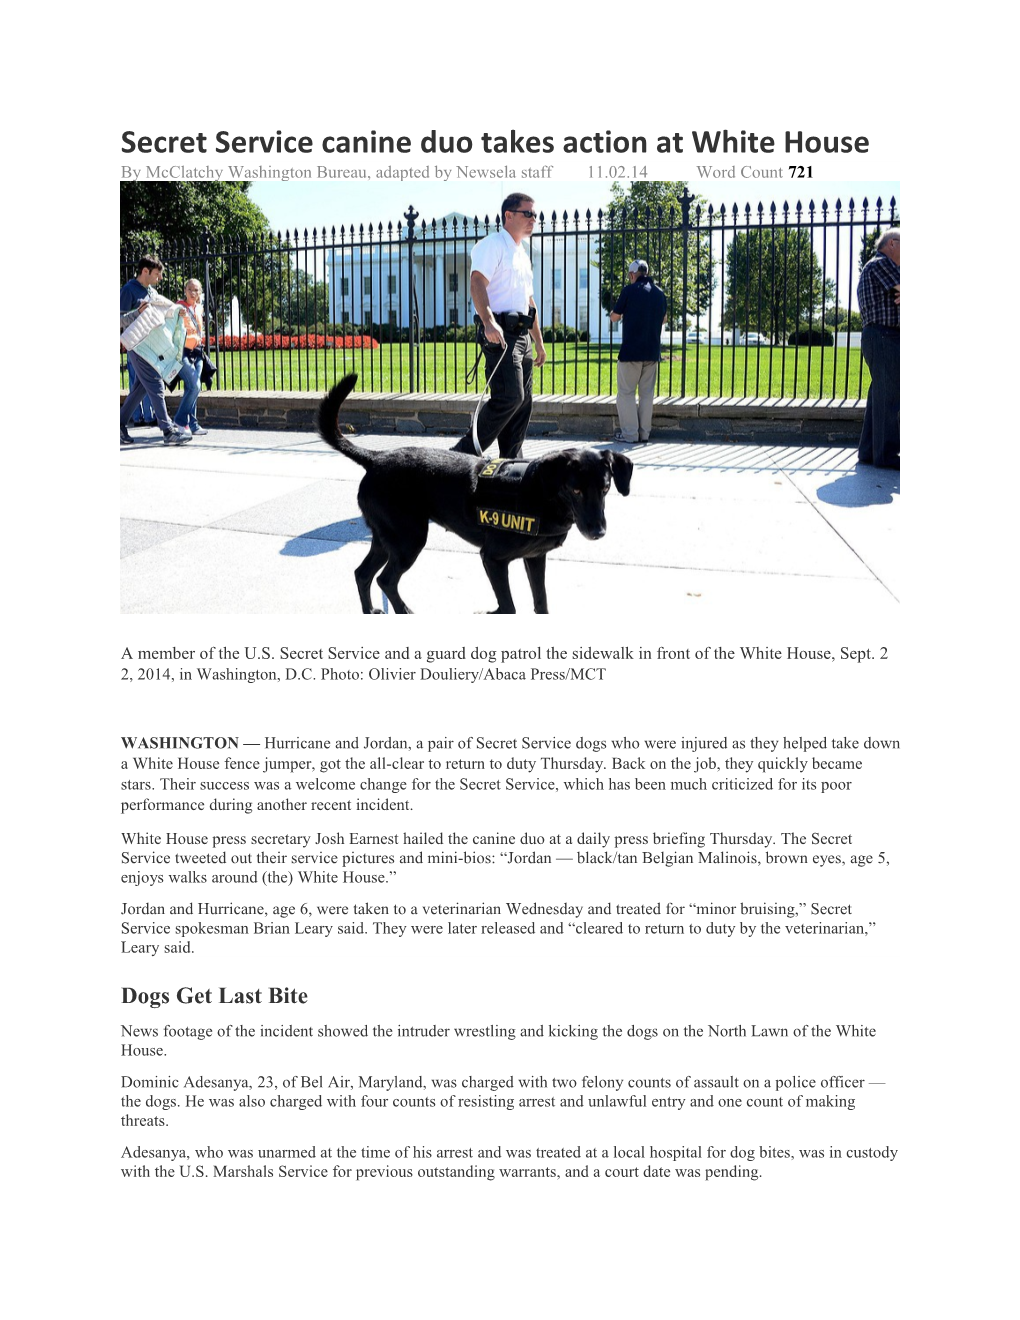 Secret Service Canine Duo Takes Action at White House